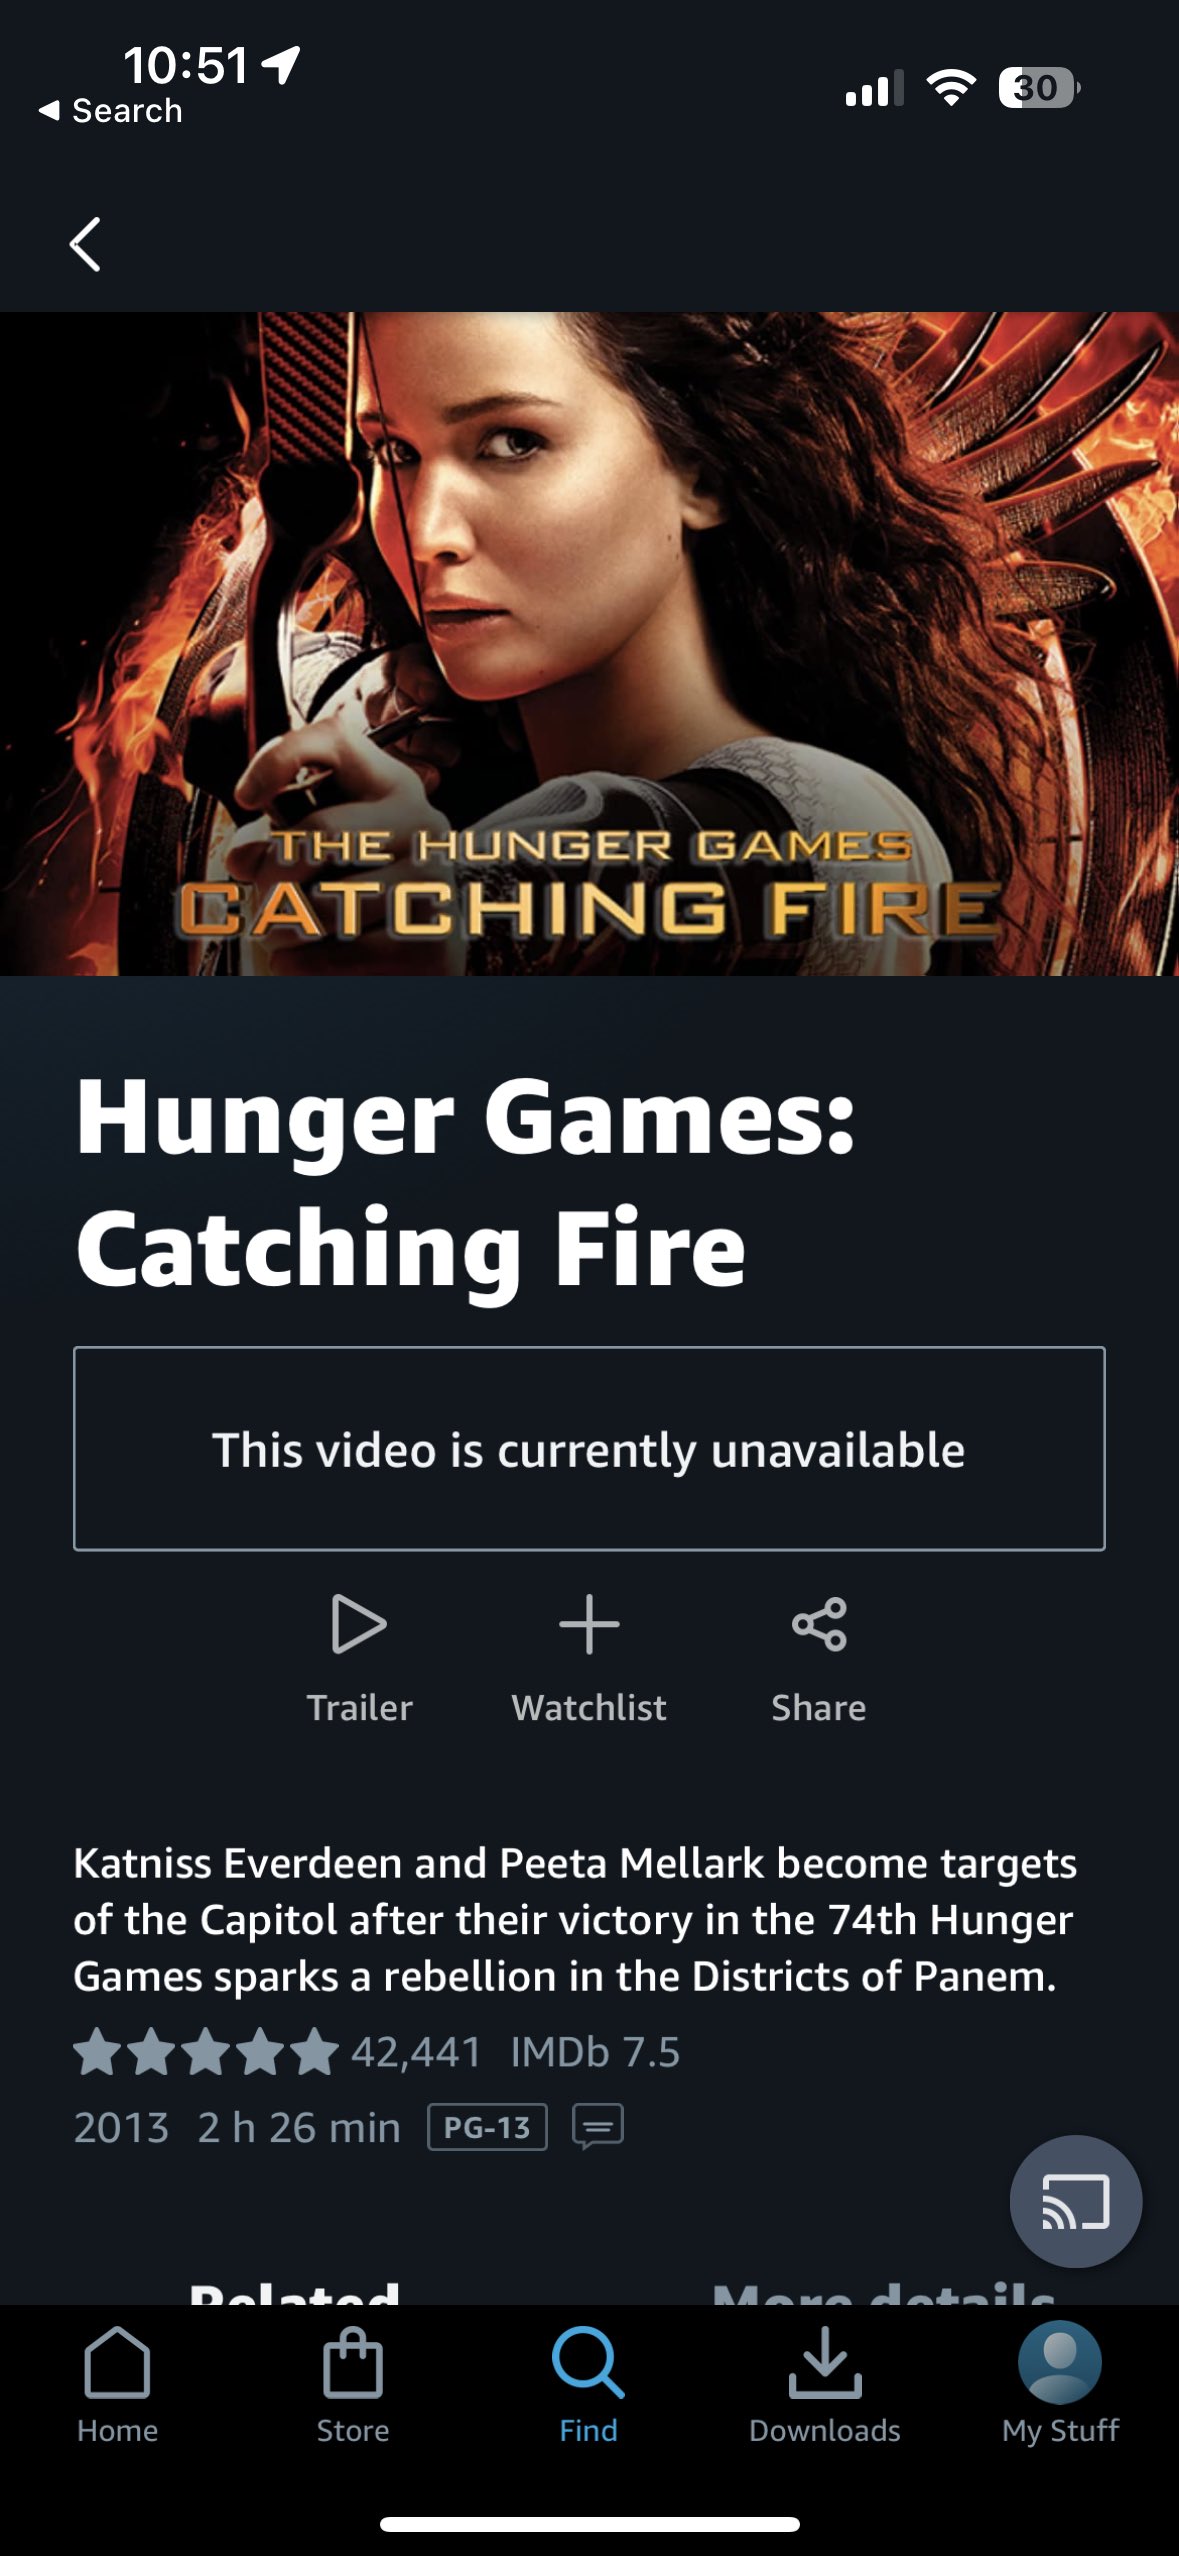 Prime Video: The Hunger Games